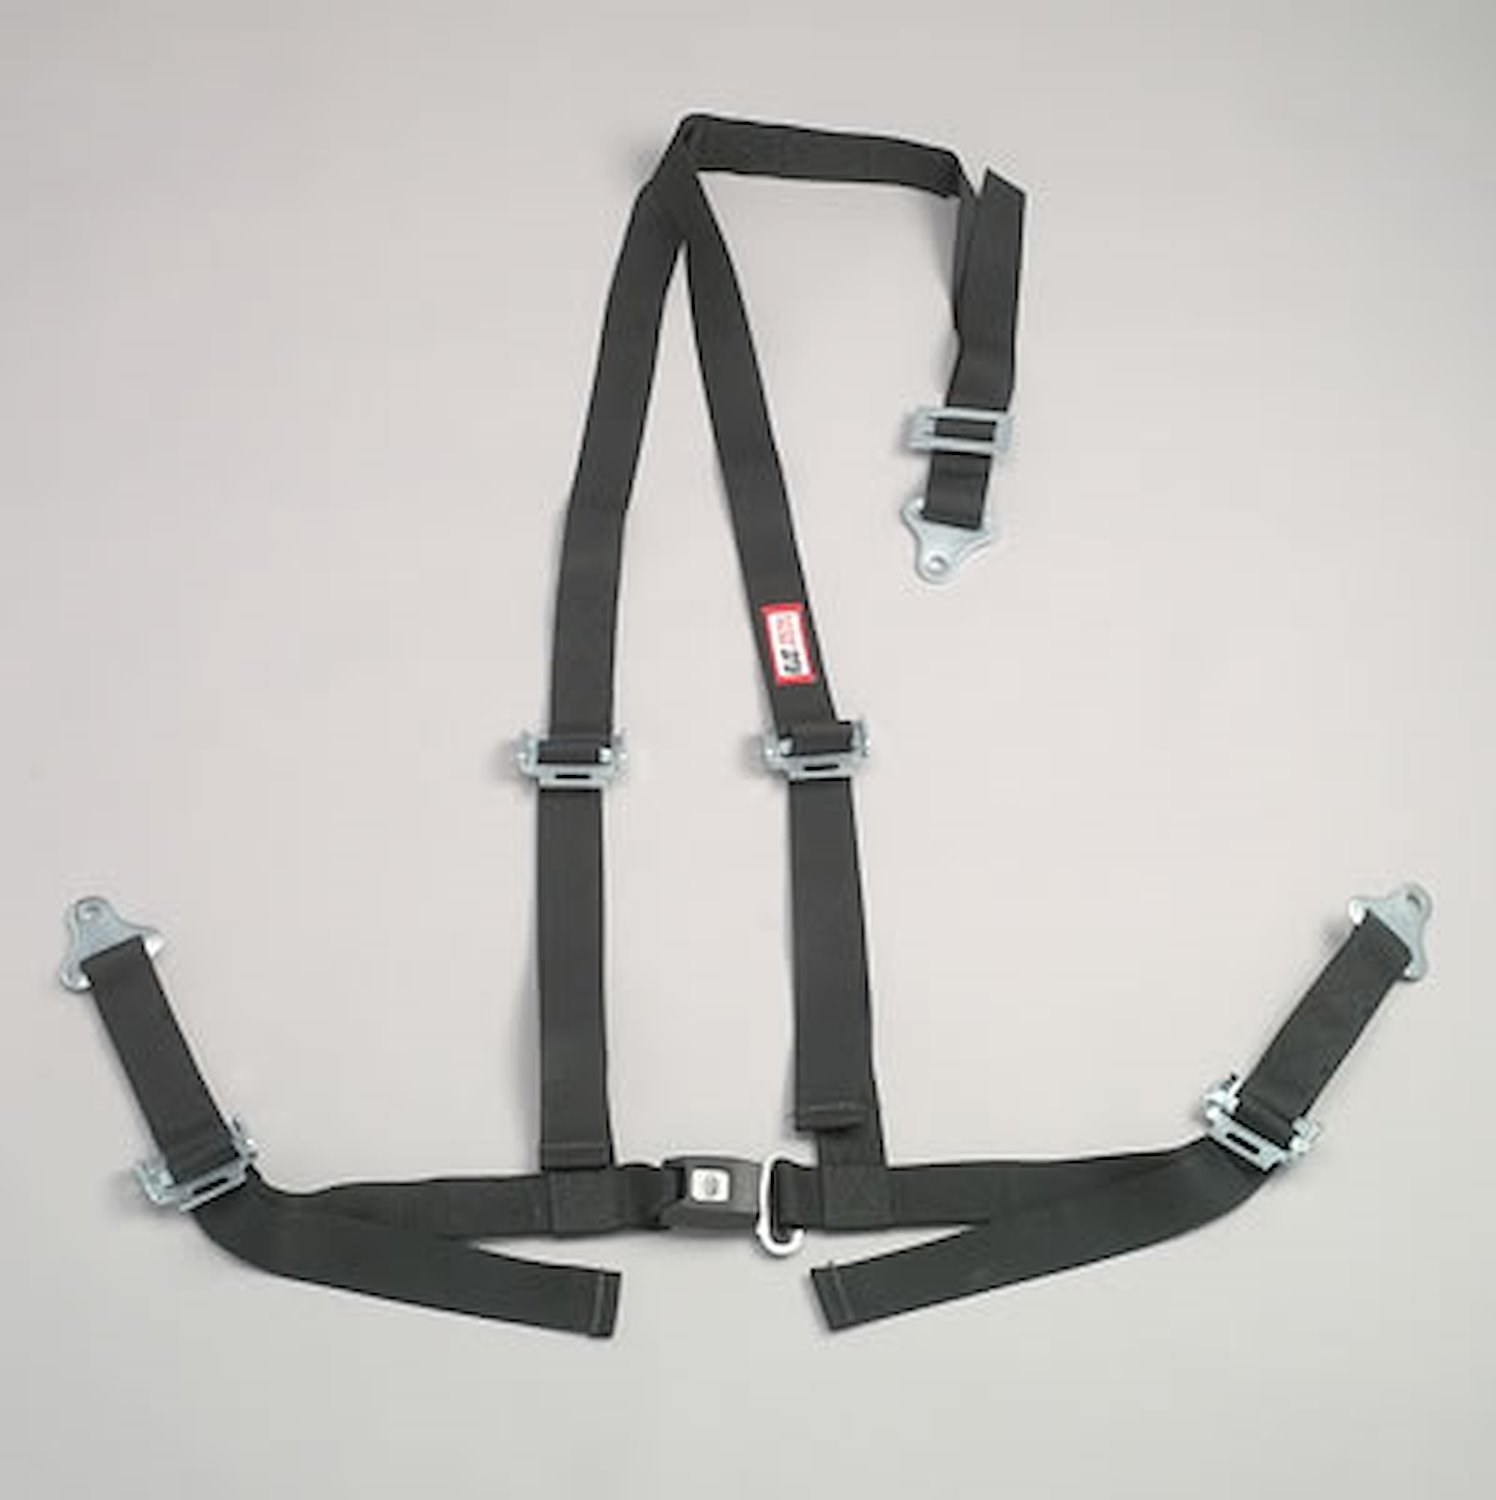 NON-SFI B&T HARNESS 2 PULL UP Lap Belt 2 S. H. V ROLL BAR Mount ALL BOLT ENDS w/STERNUM STRAP RED